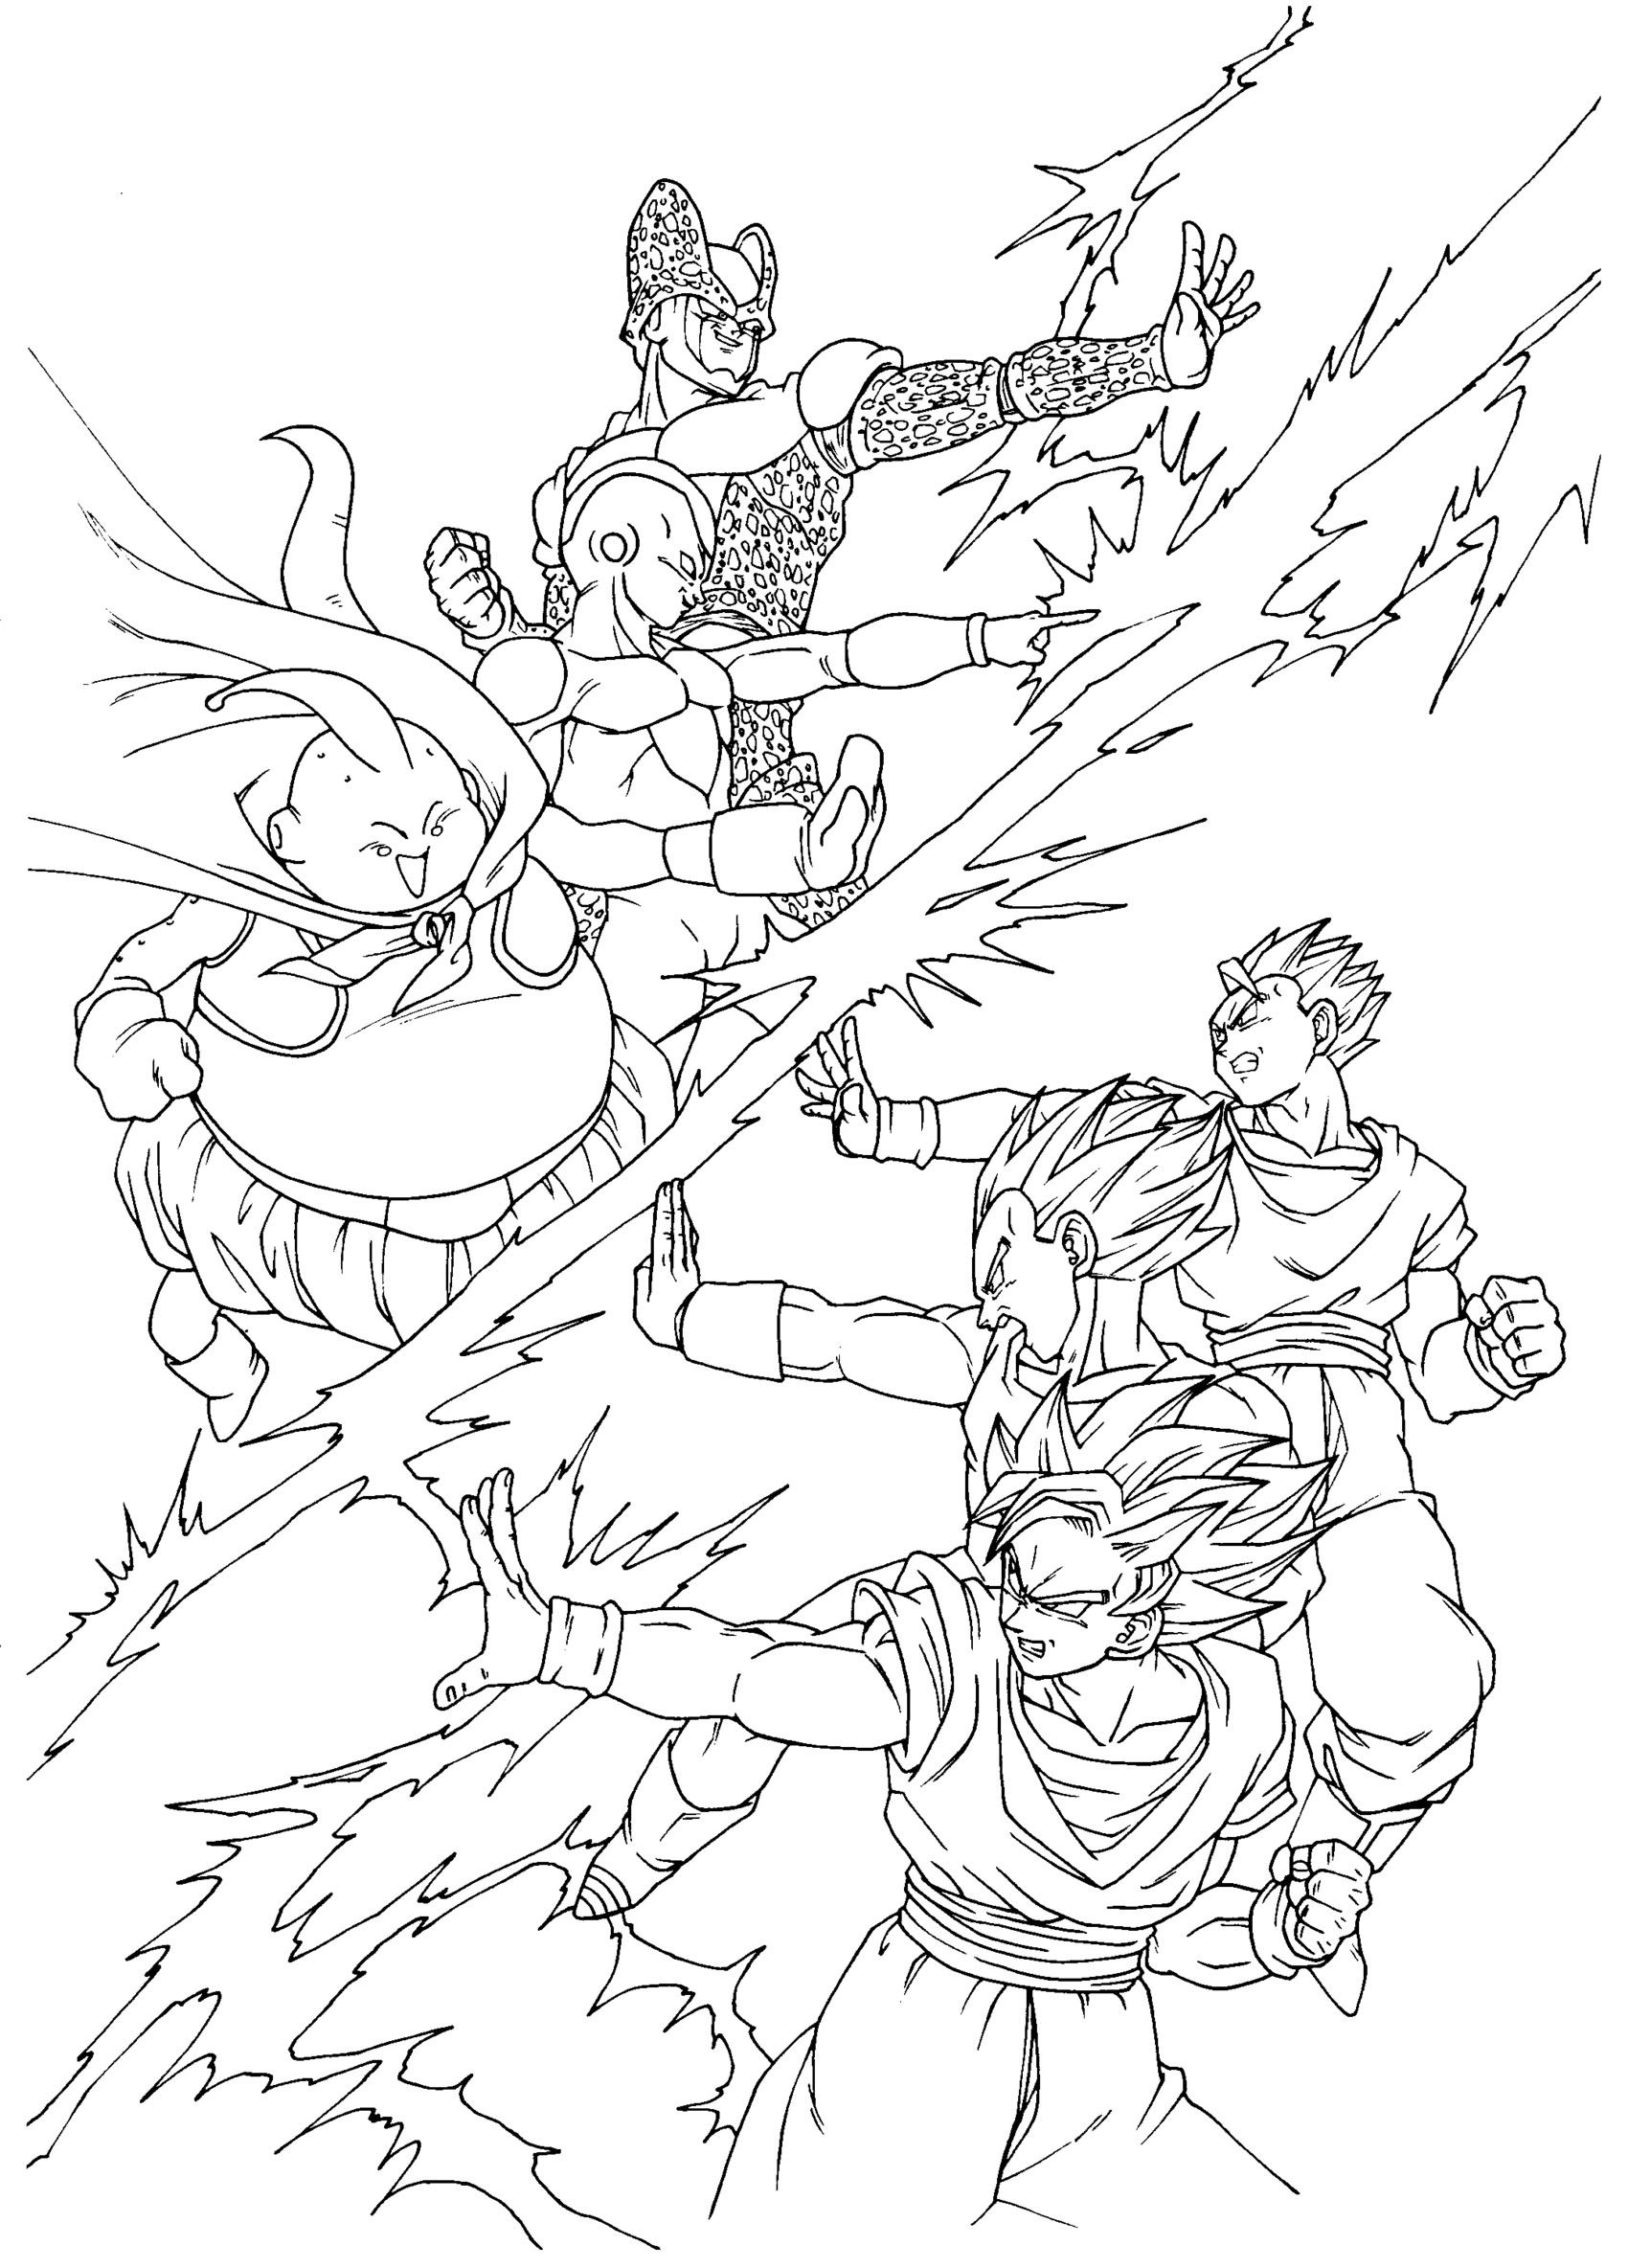 Free Dragon Ball Z coloring page to print and color, for kids : Songoku , Vegeta , Son. Gohan against Cell , Boo and Freezer